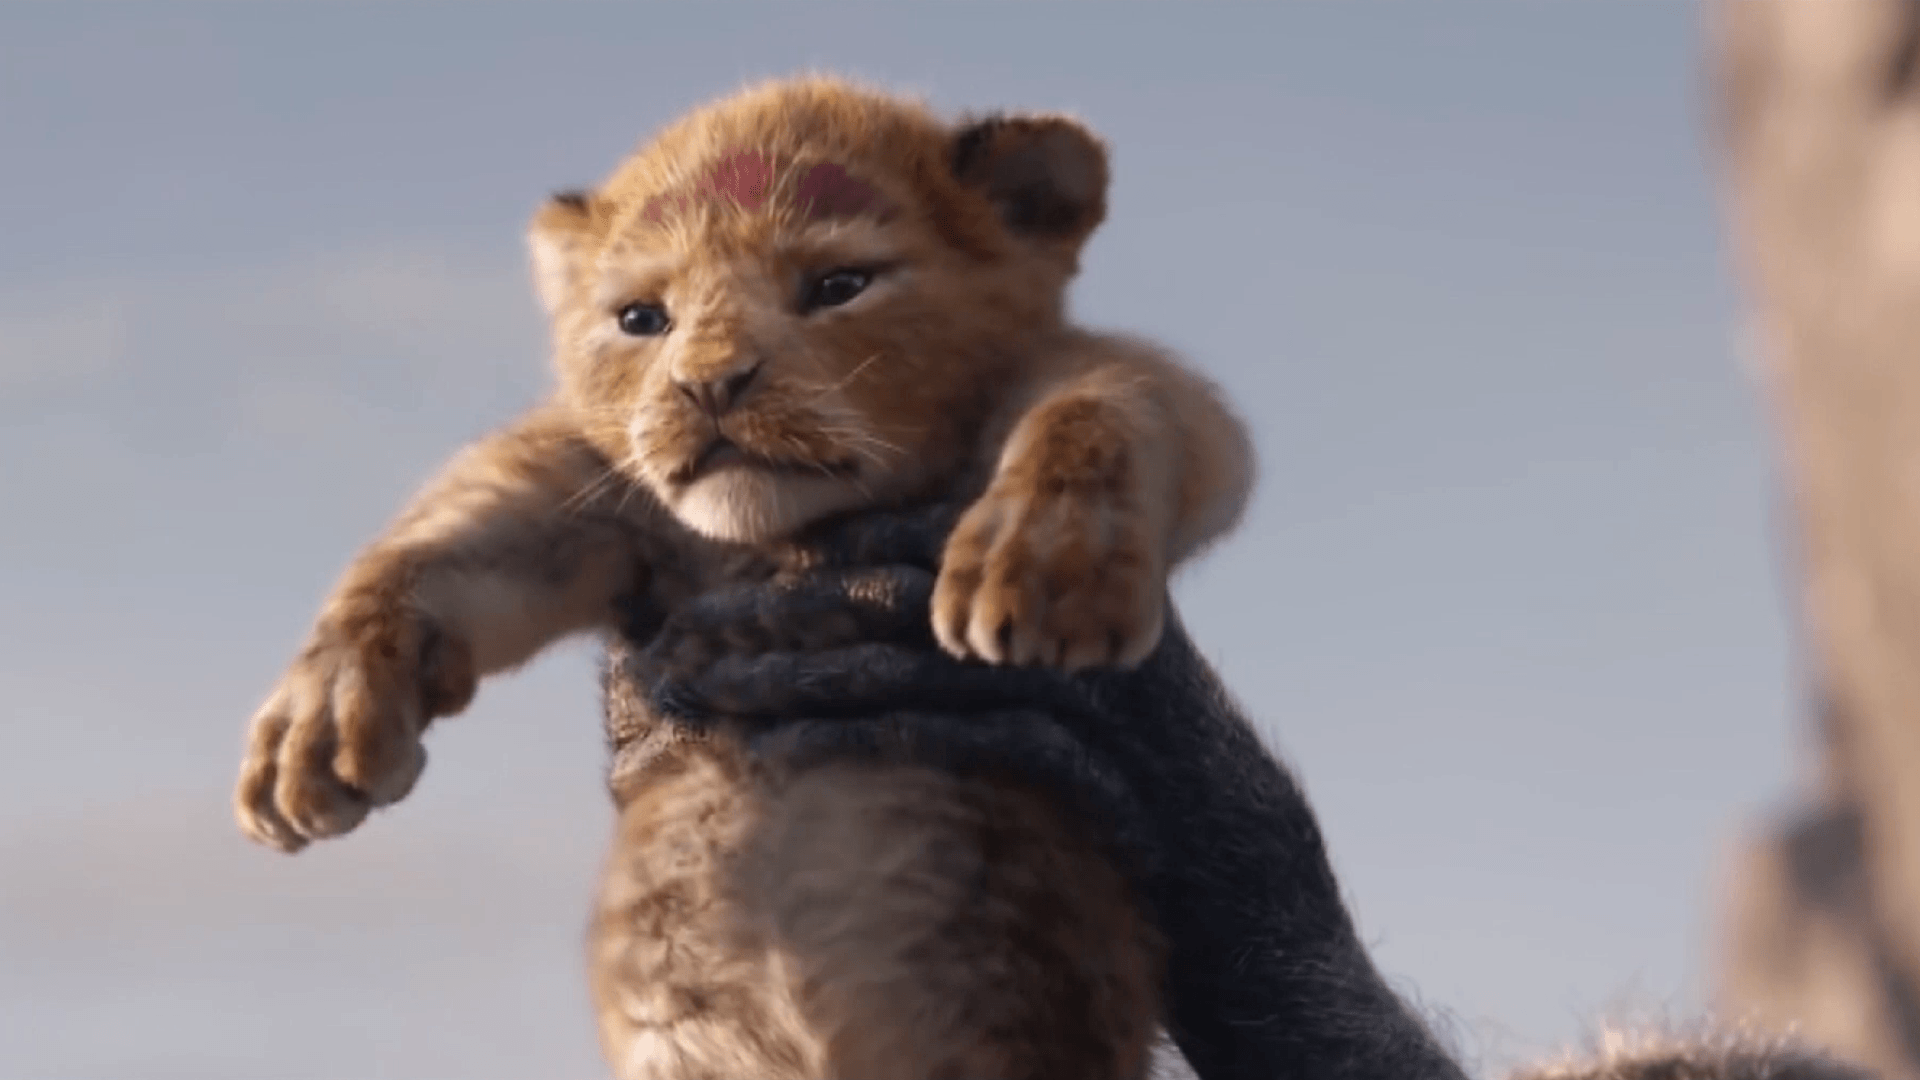 Disney Shares First Look At Live Action 'The Lion King' In New